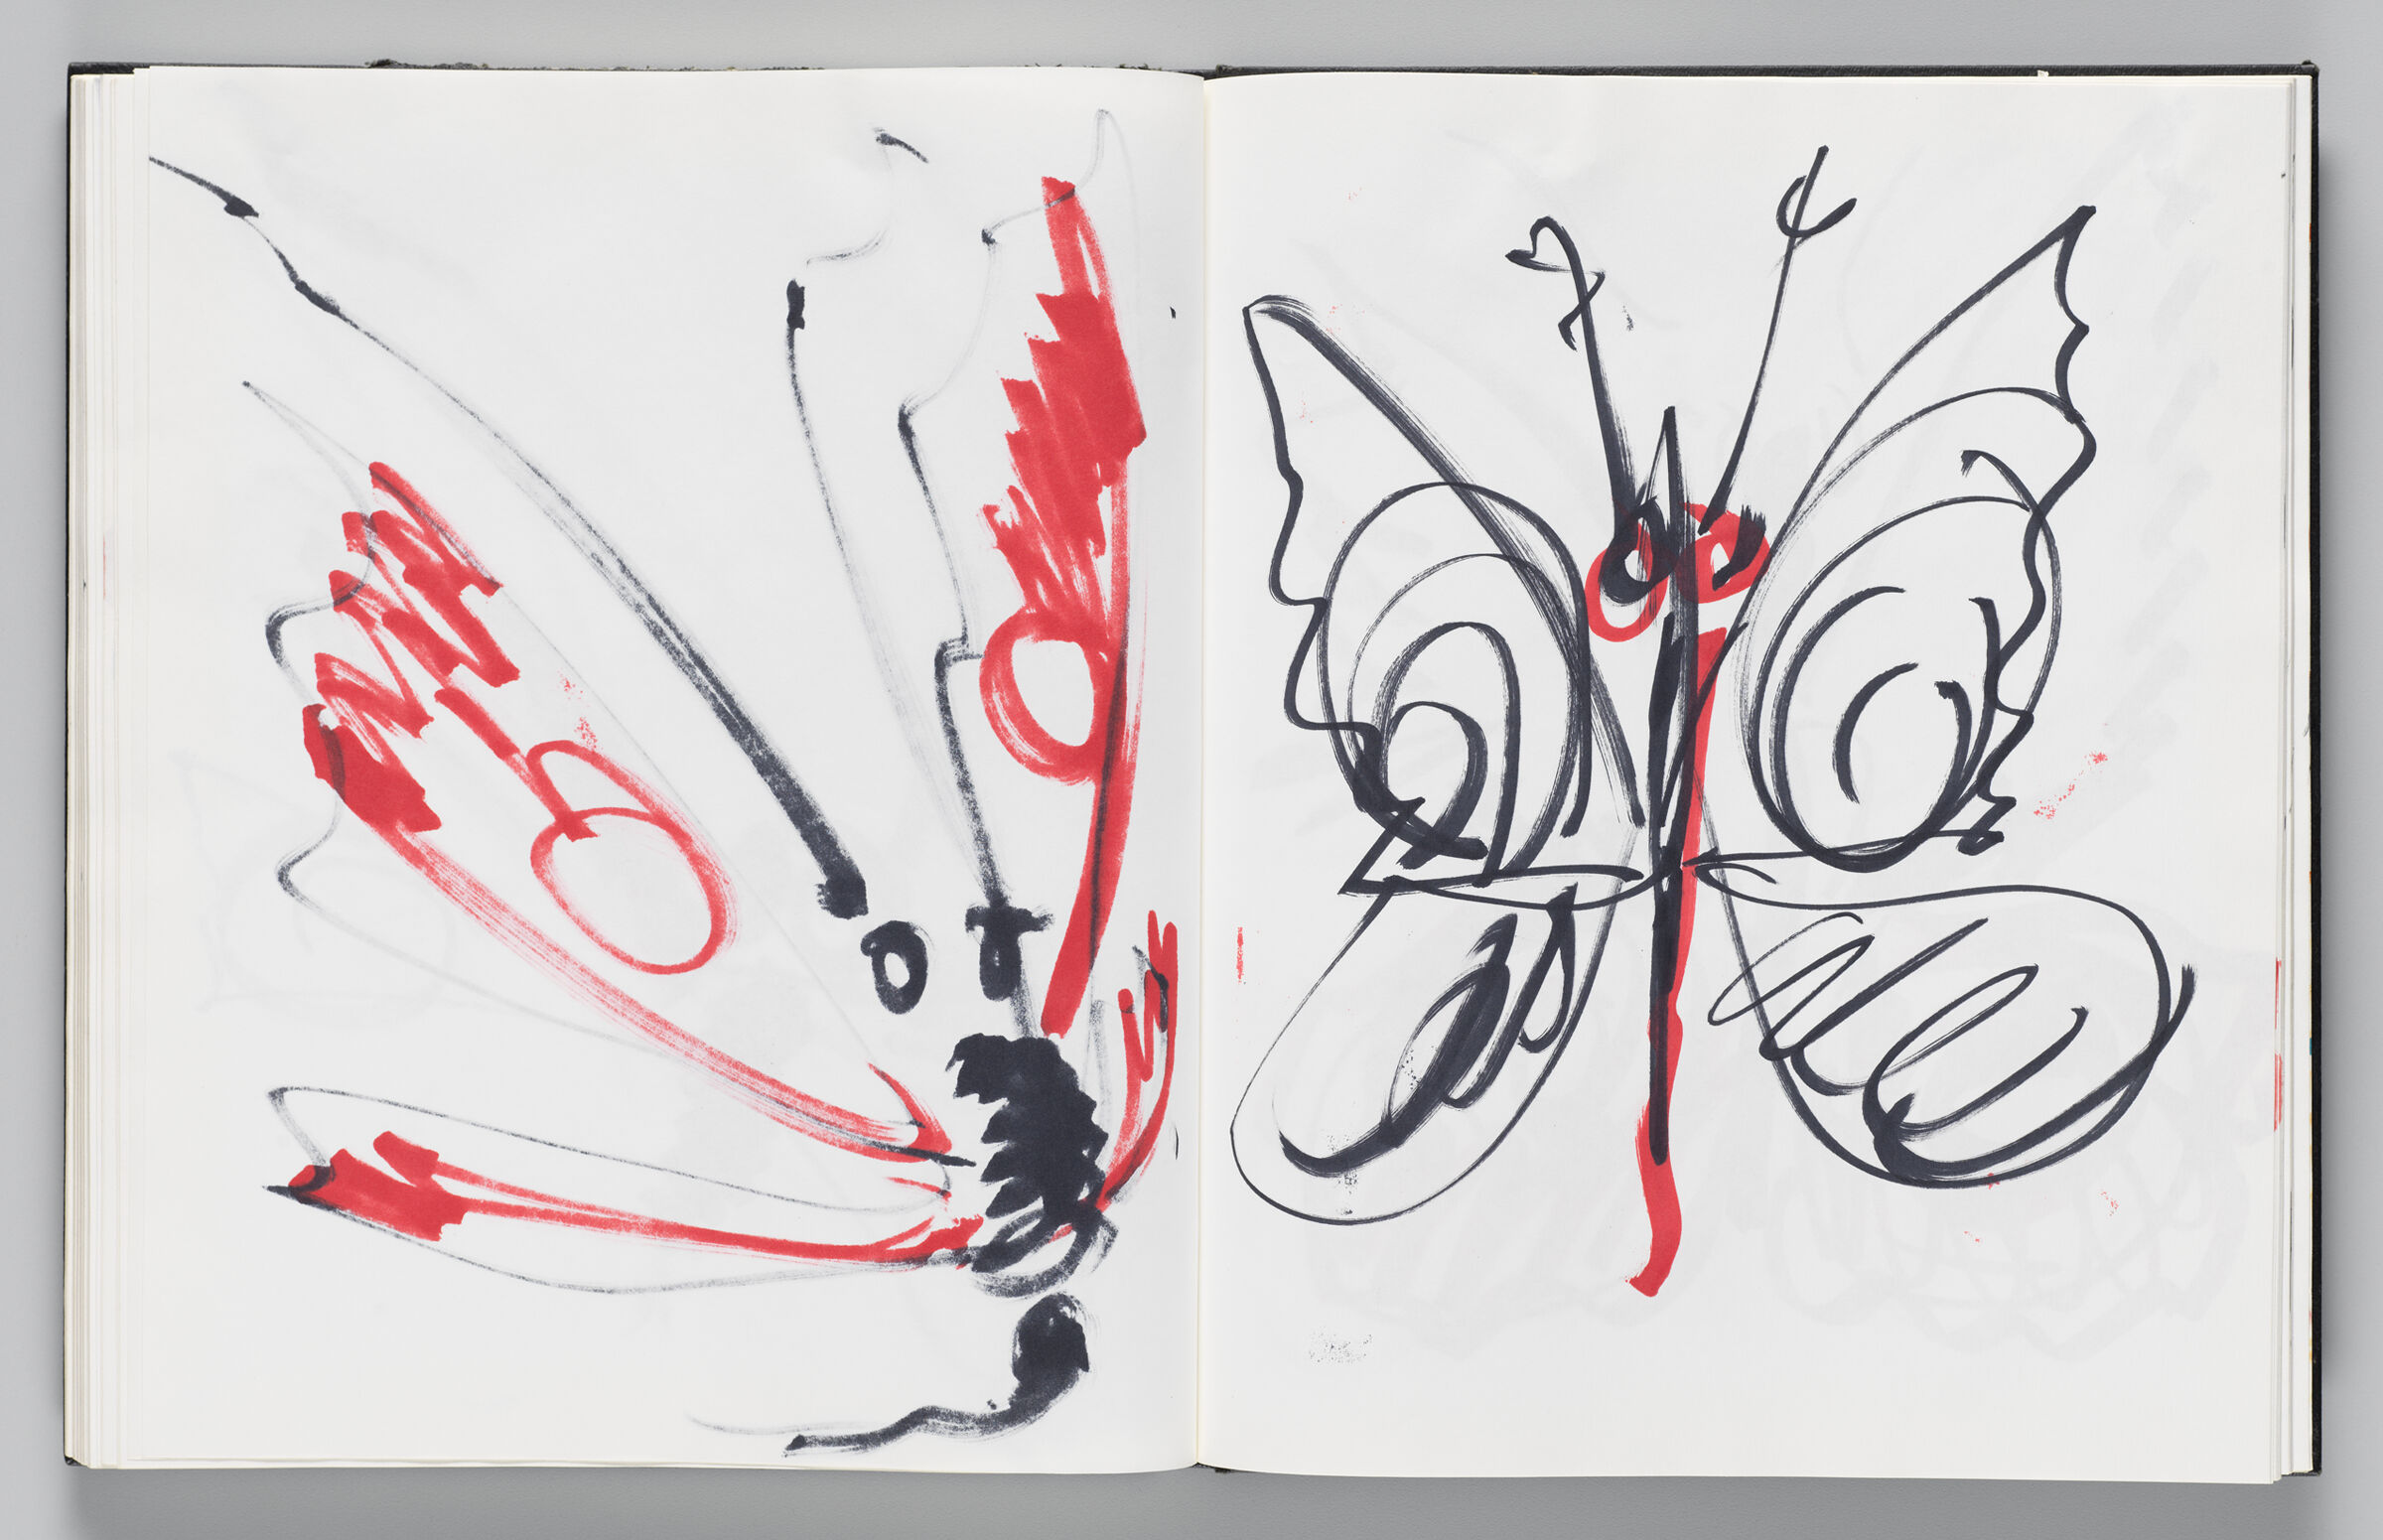 Untitled (Bleed-Through Of Previous Page, Left Page); Untitled (Winged Insect With Faint Color Transfer, Right Page)